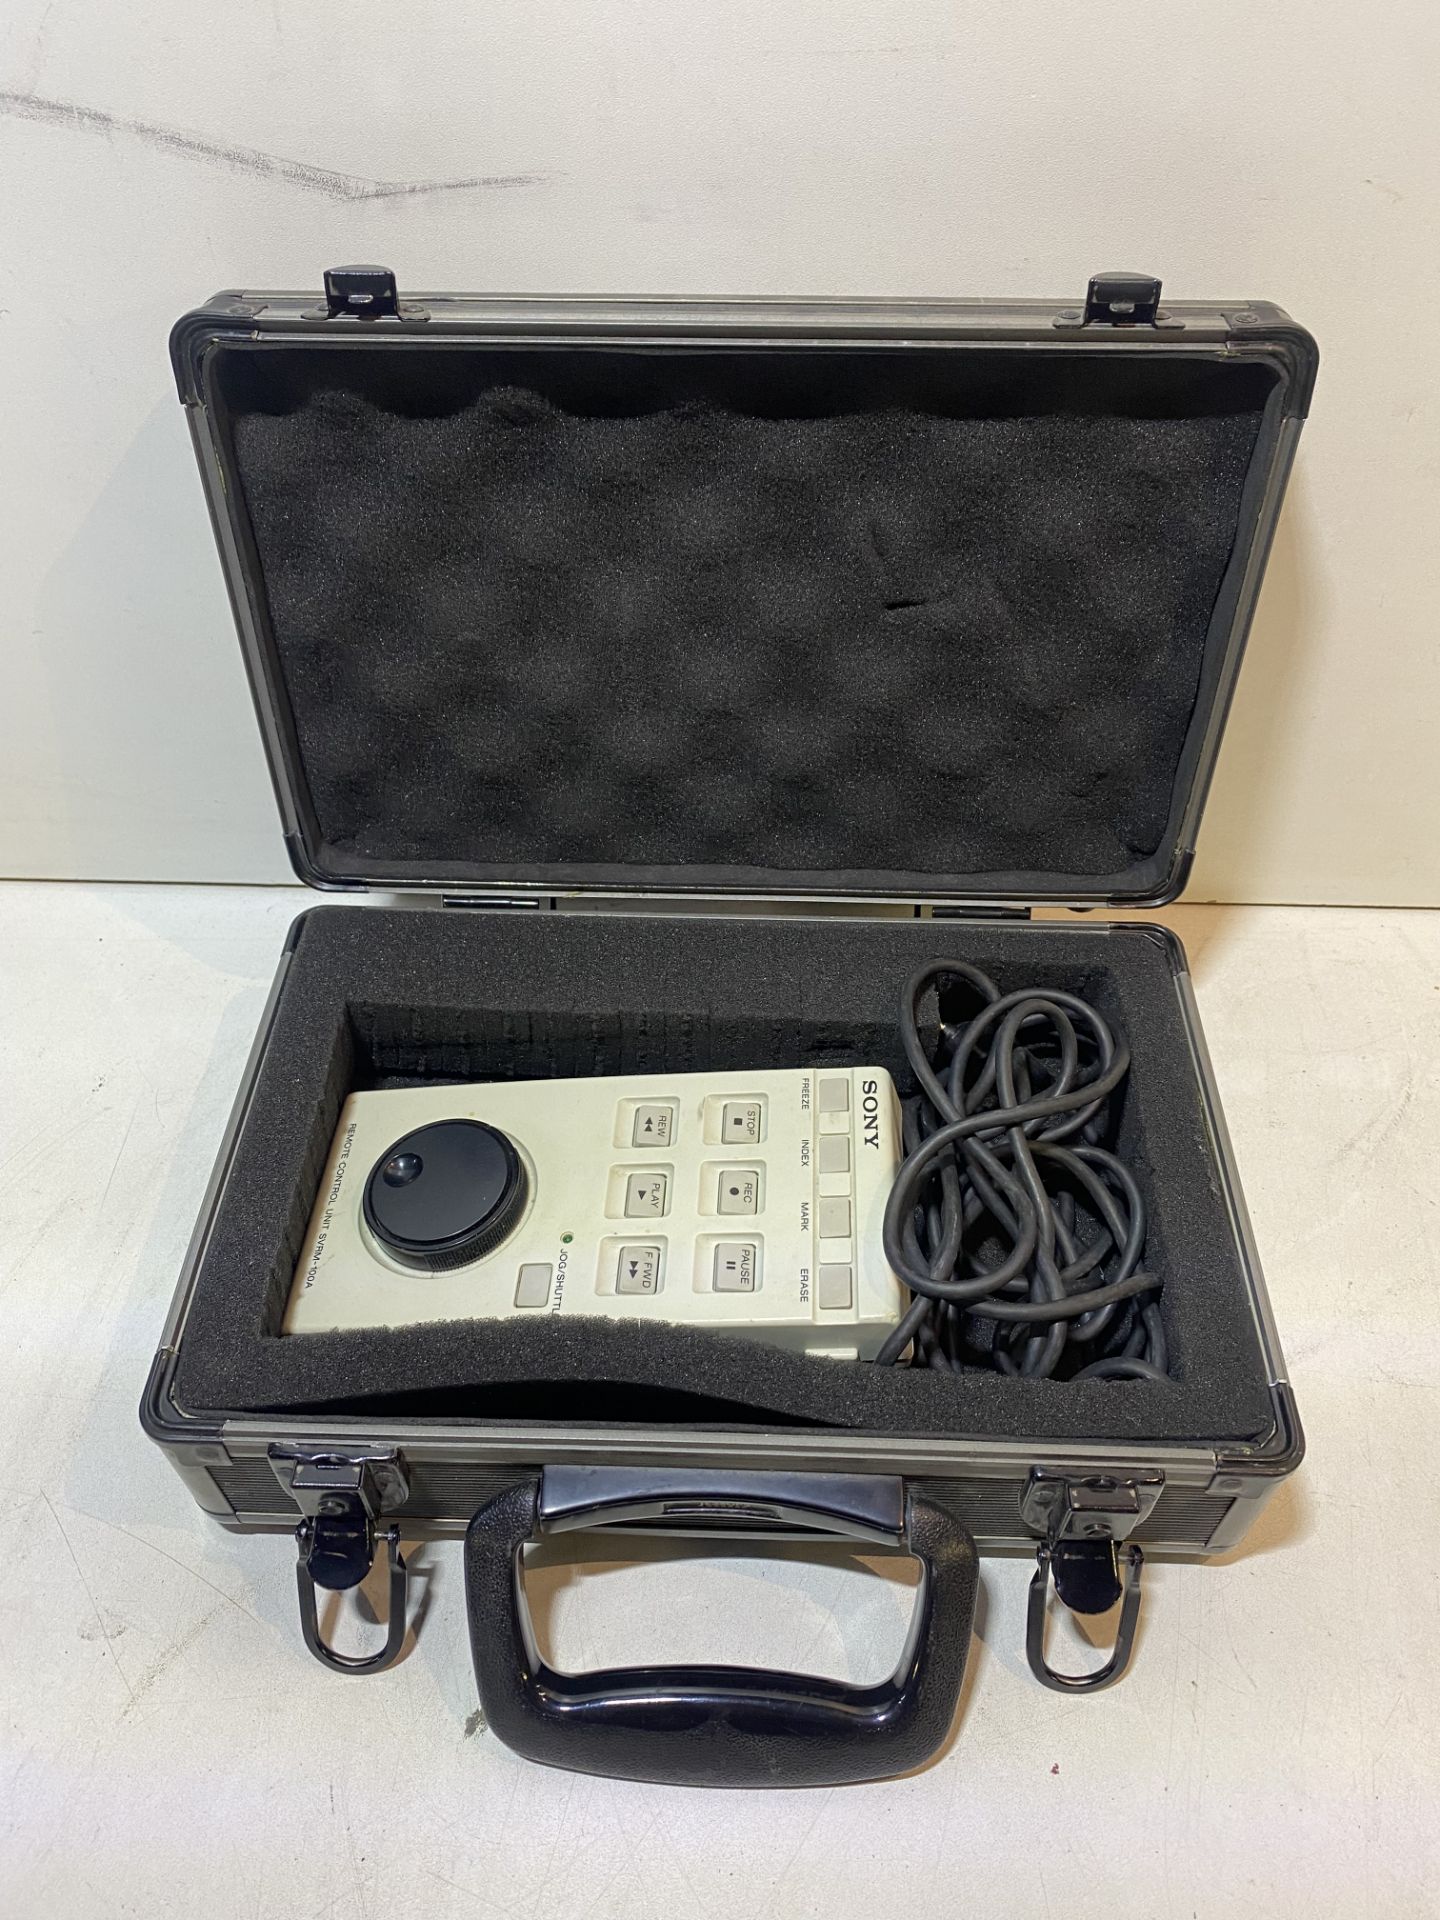 Sony SVRM-100A Wired Remote Control Unit w/ Carry Case - Image 6 of 7